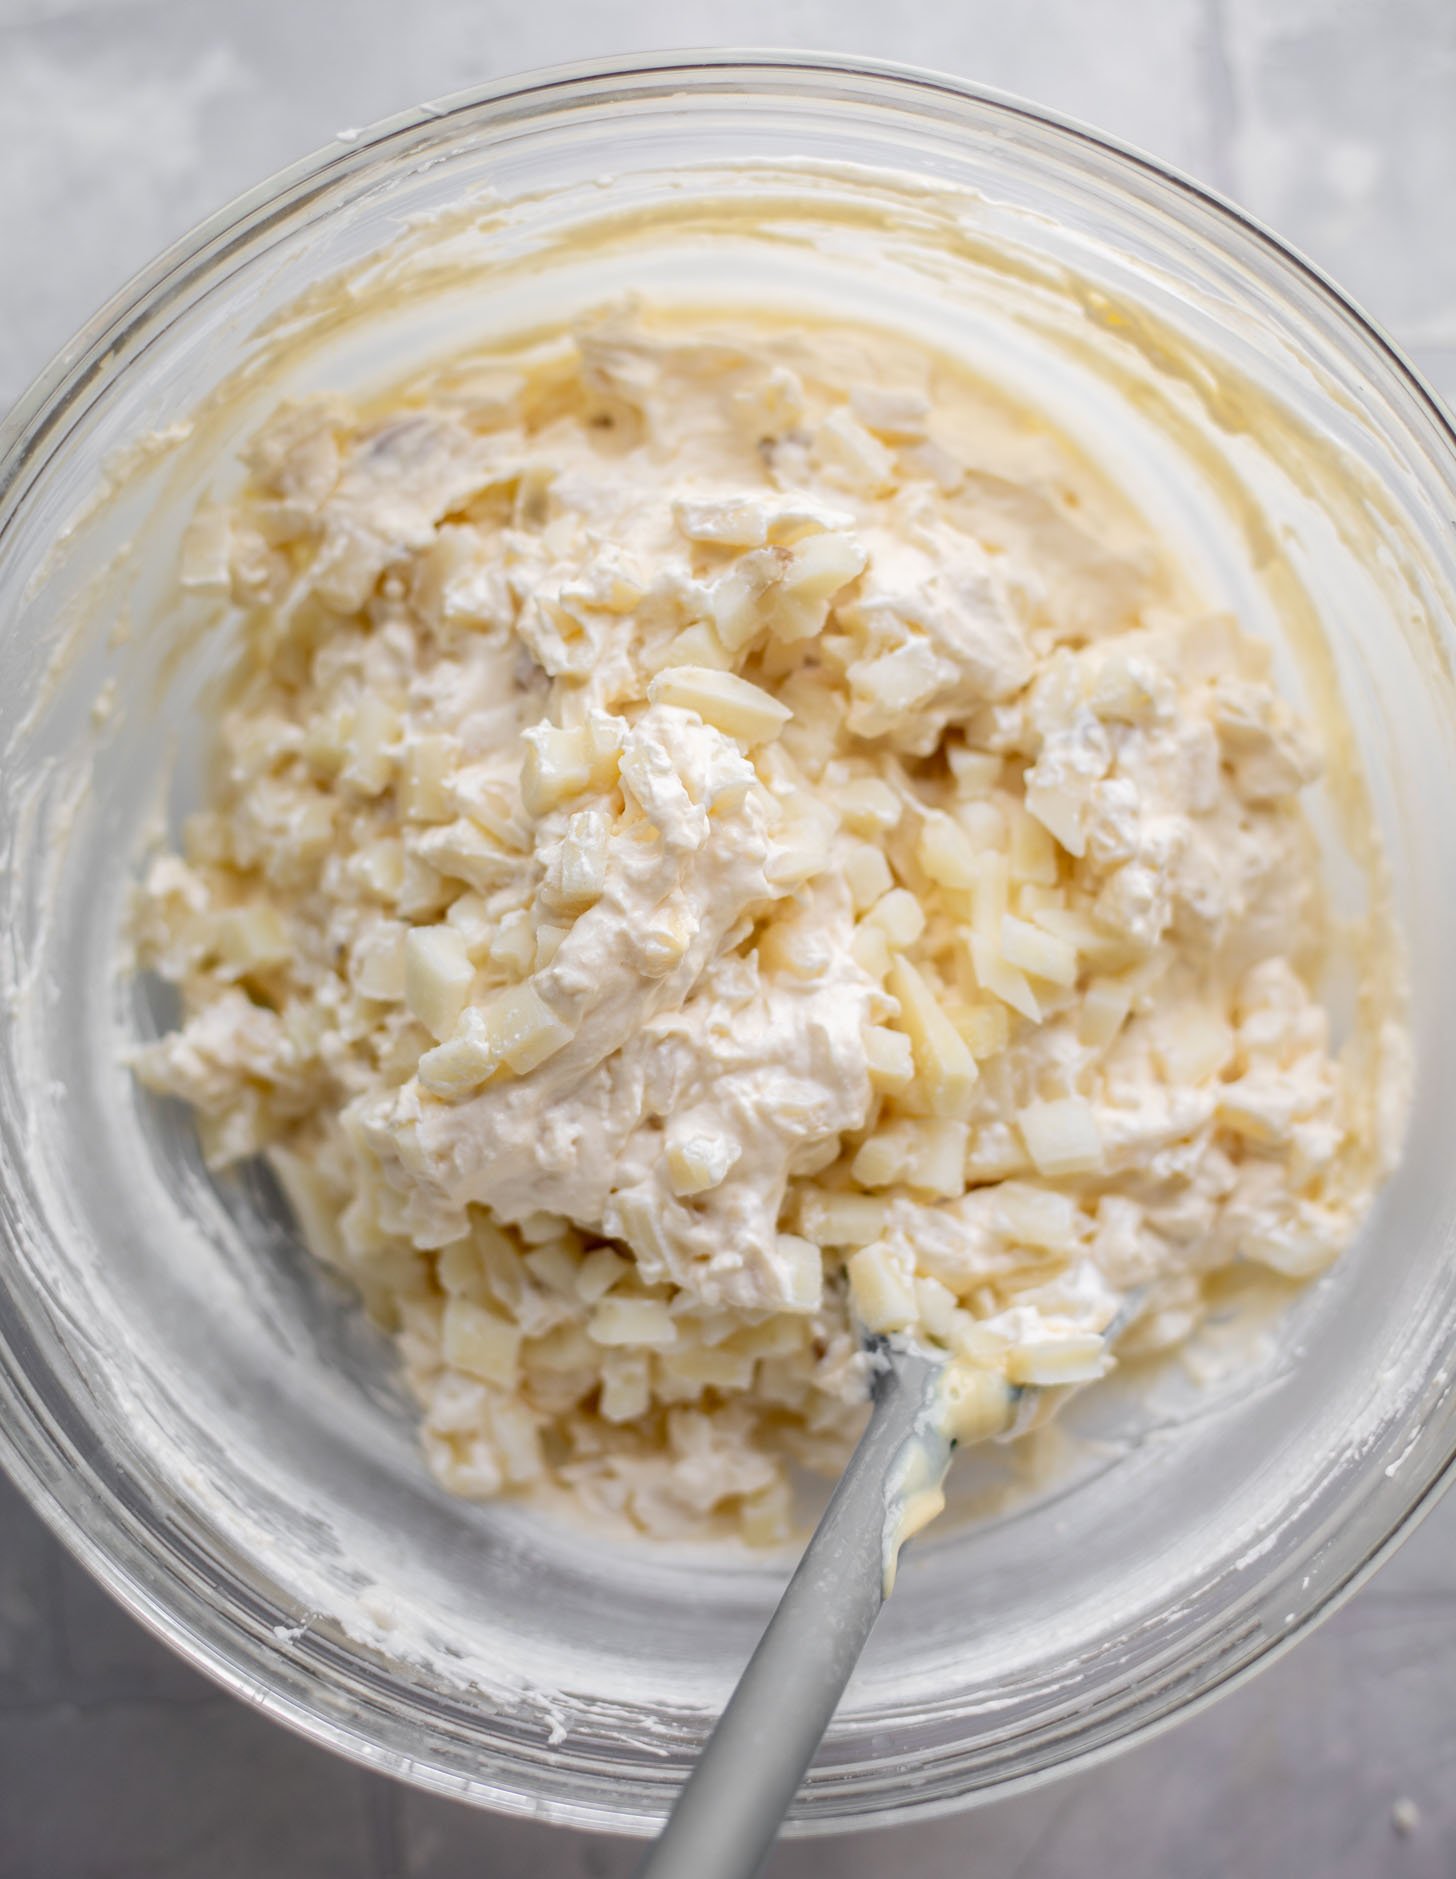 diced potatoes with sour cream